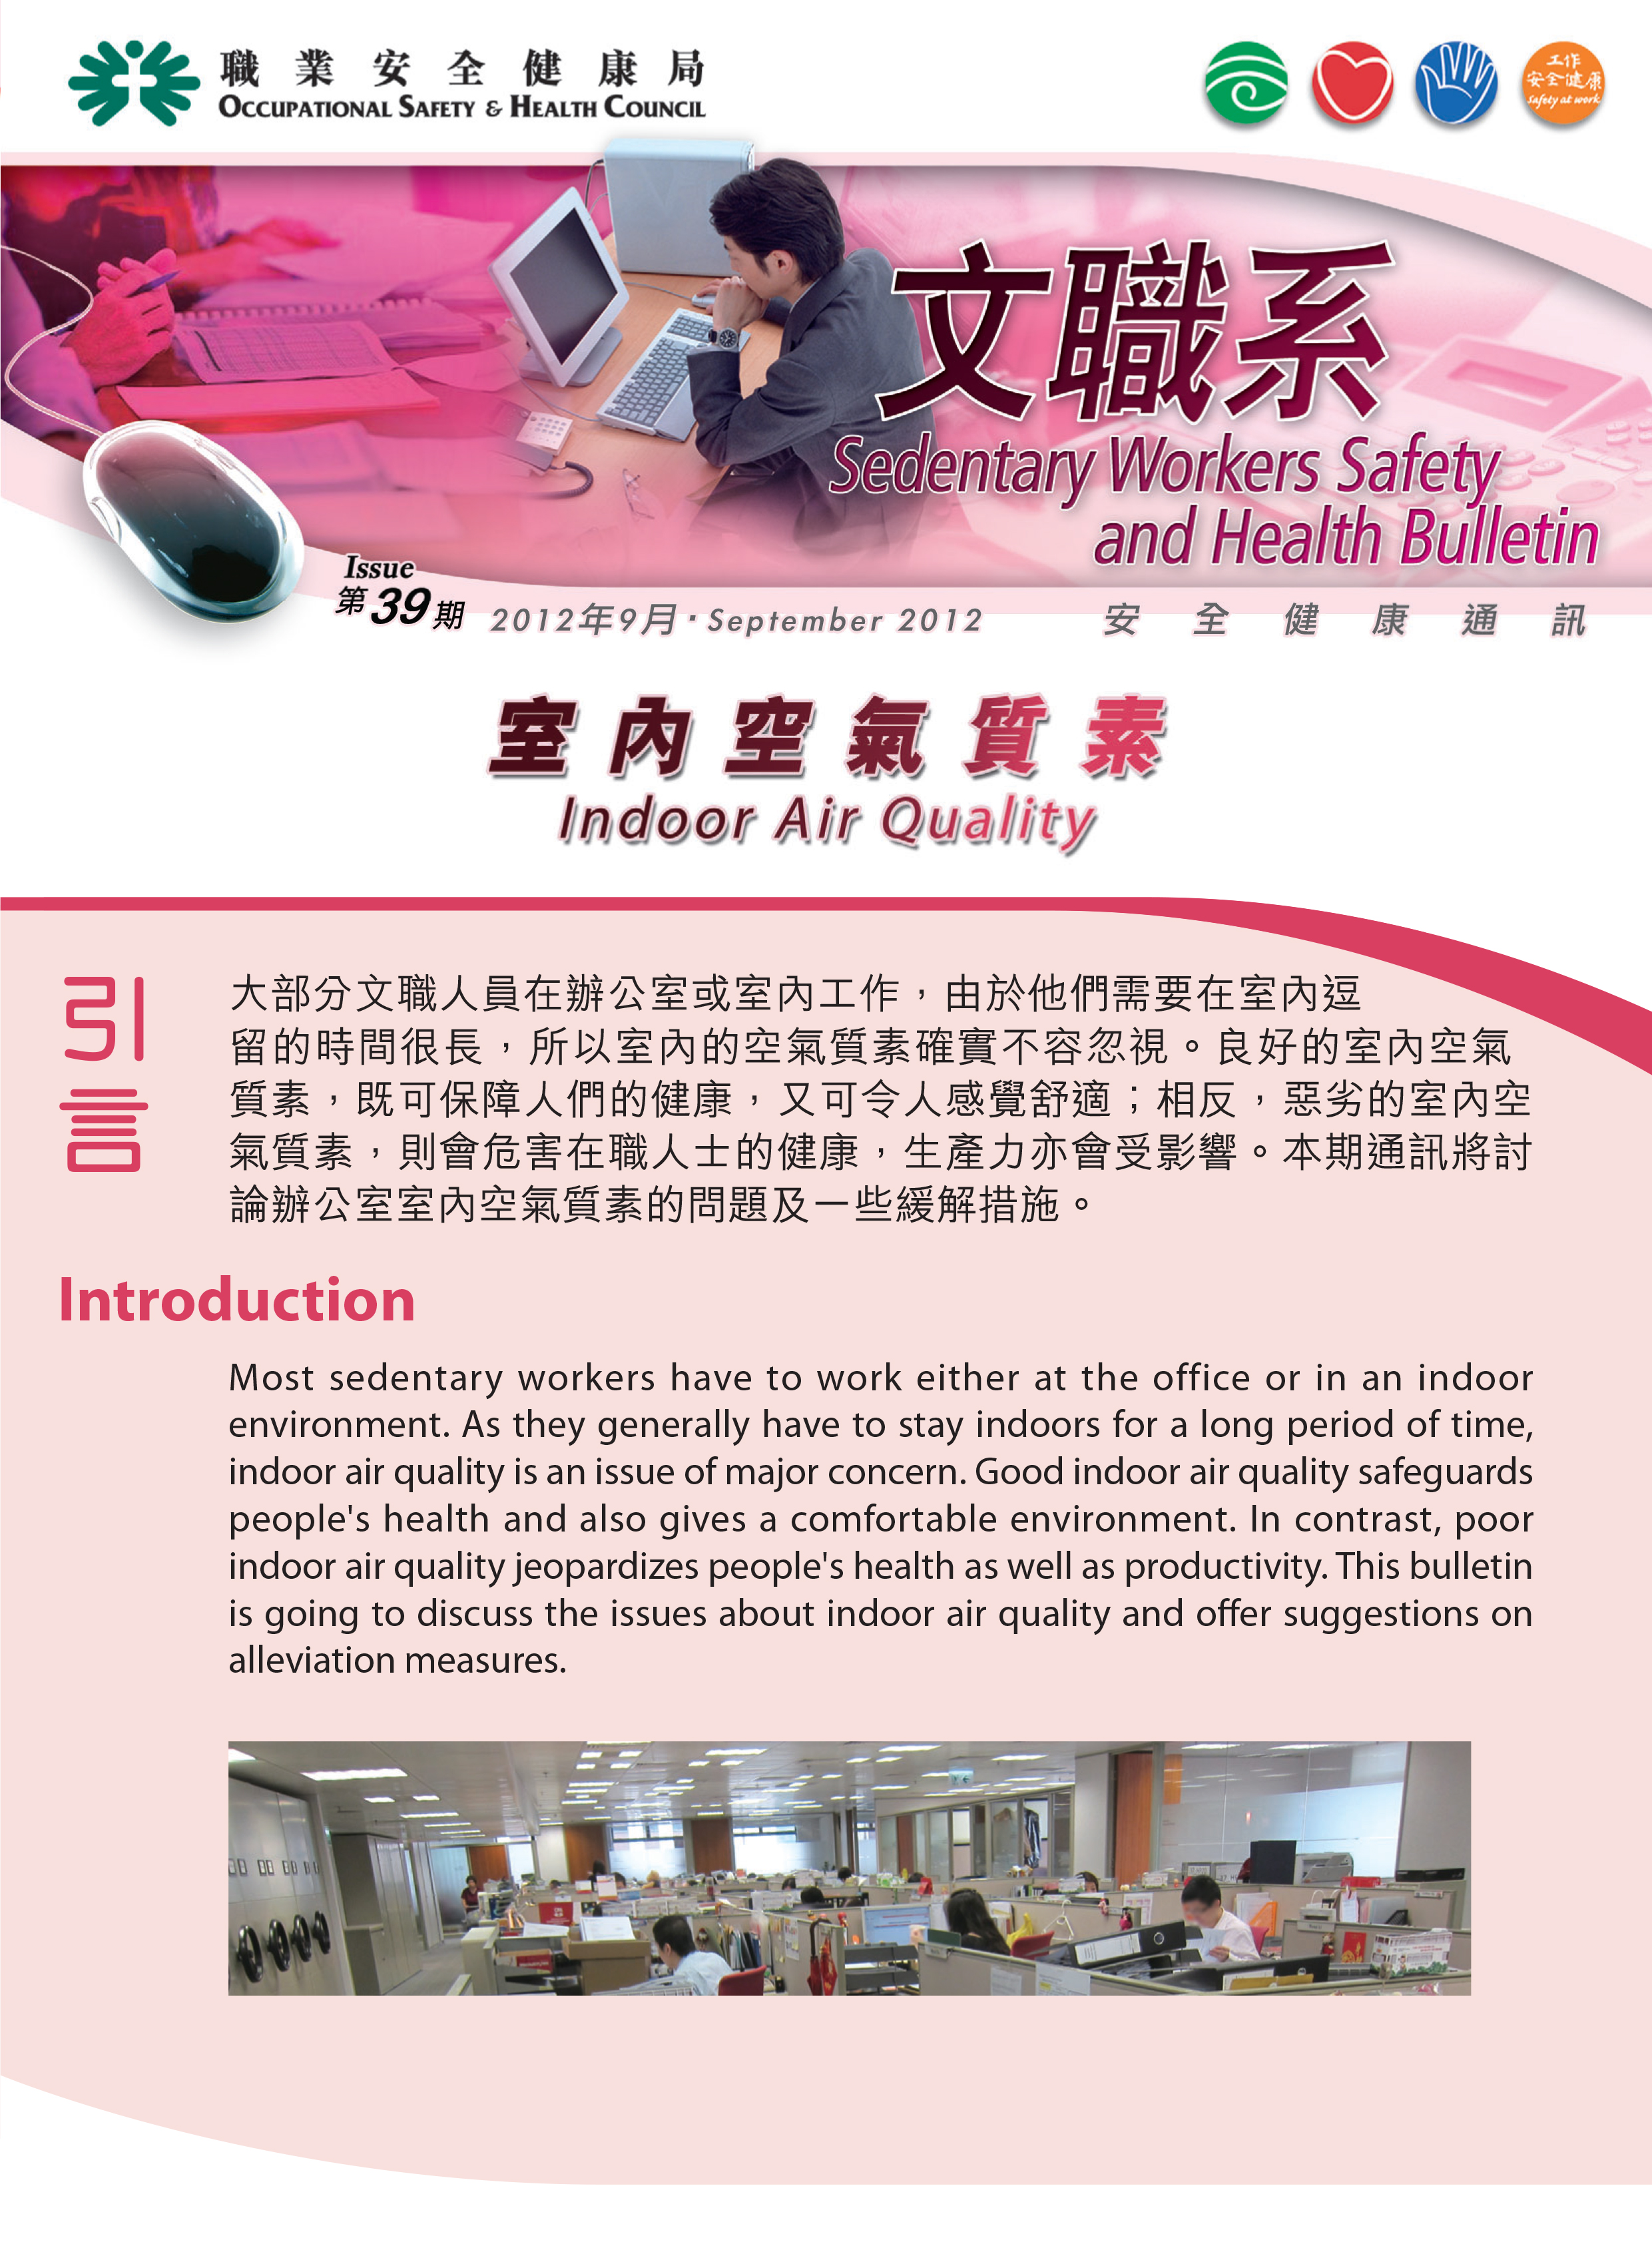 Safety and Health Bulletin: Indoor Air Quality (published by OSHC)